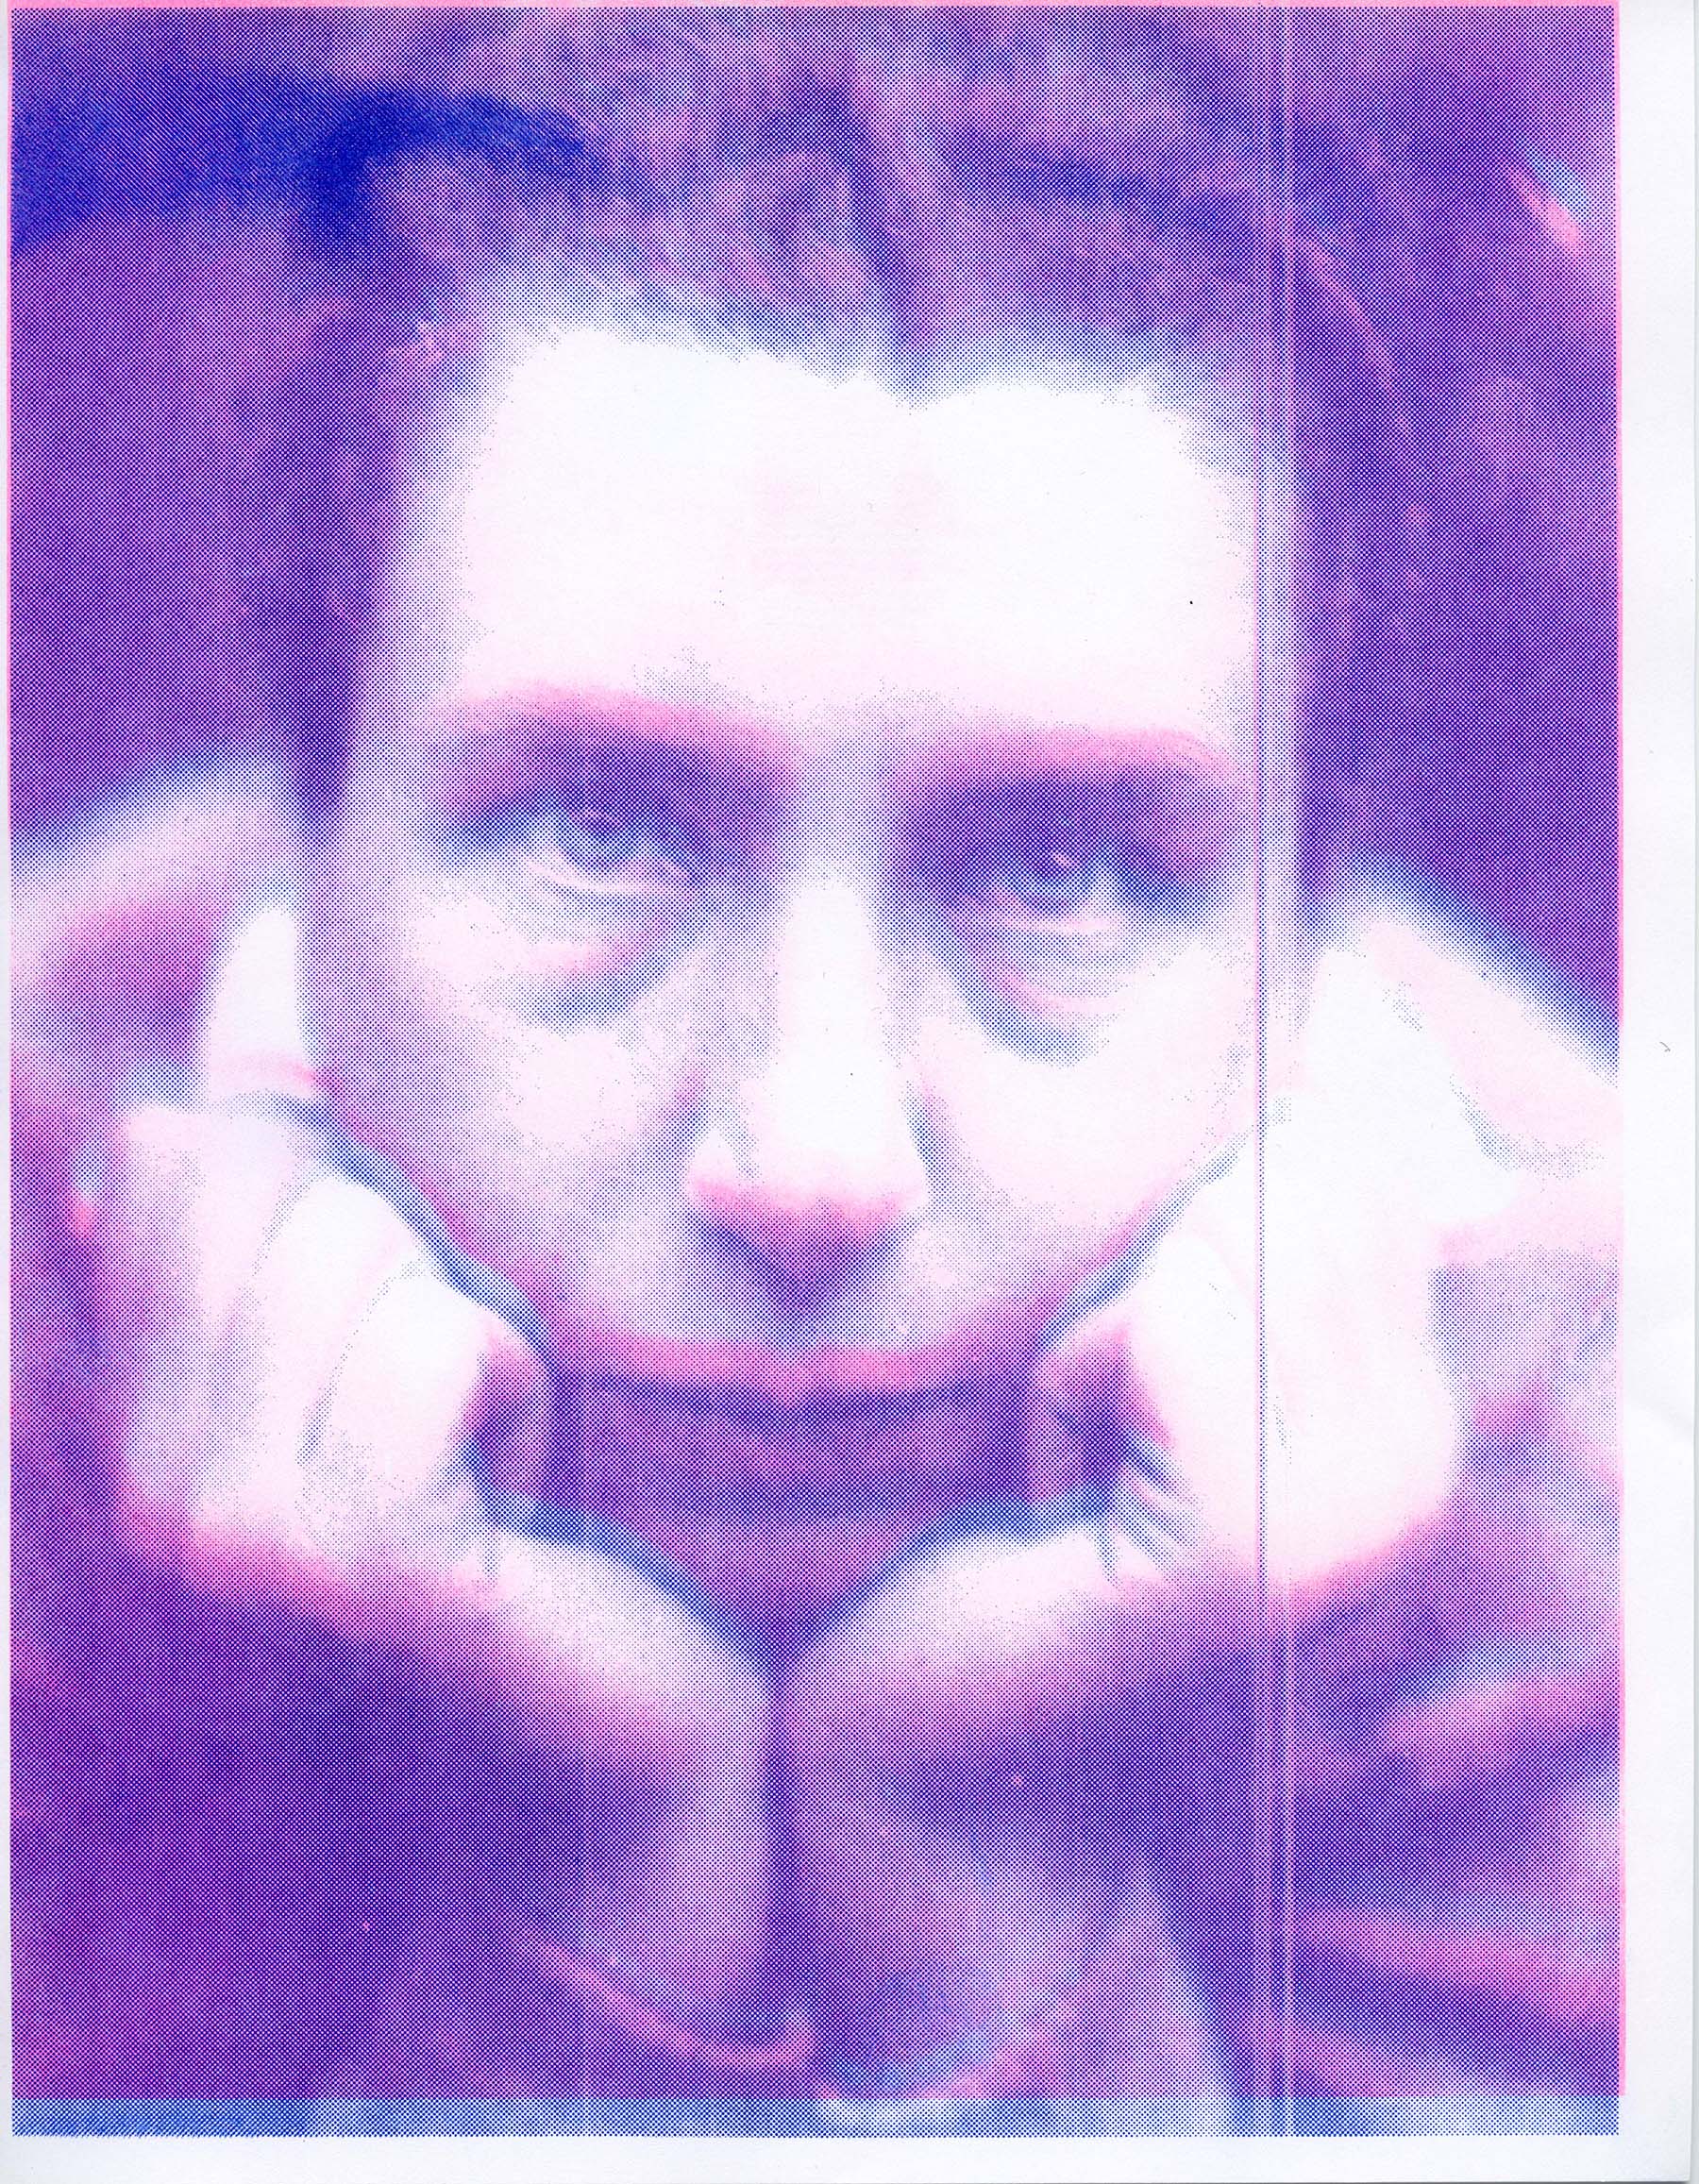 Risograph image remediating Lucia Moholy self-portrait. Trudi Lynn Smith and Kate Hennessy